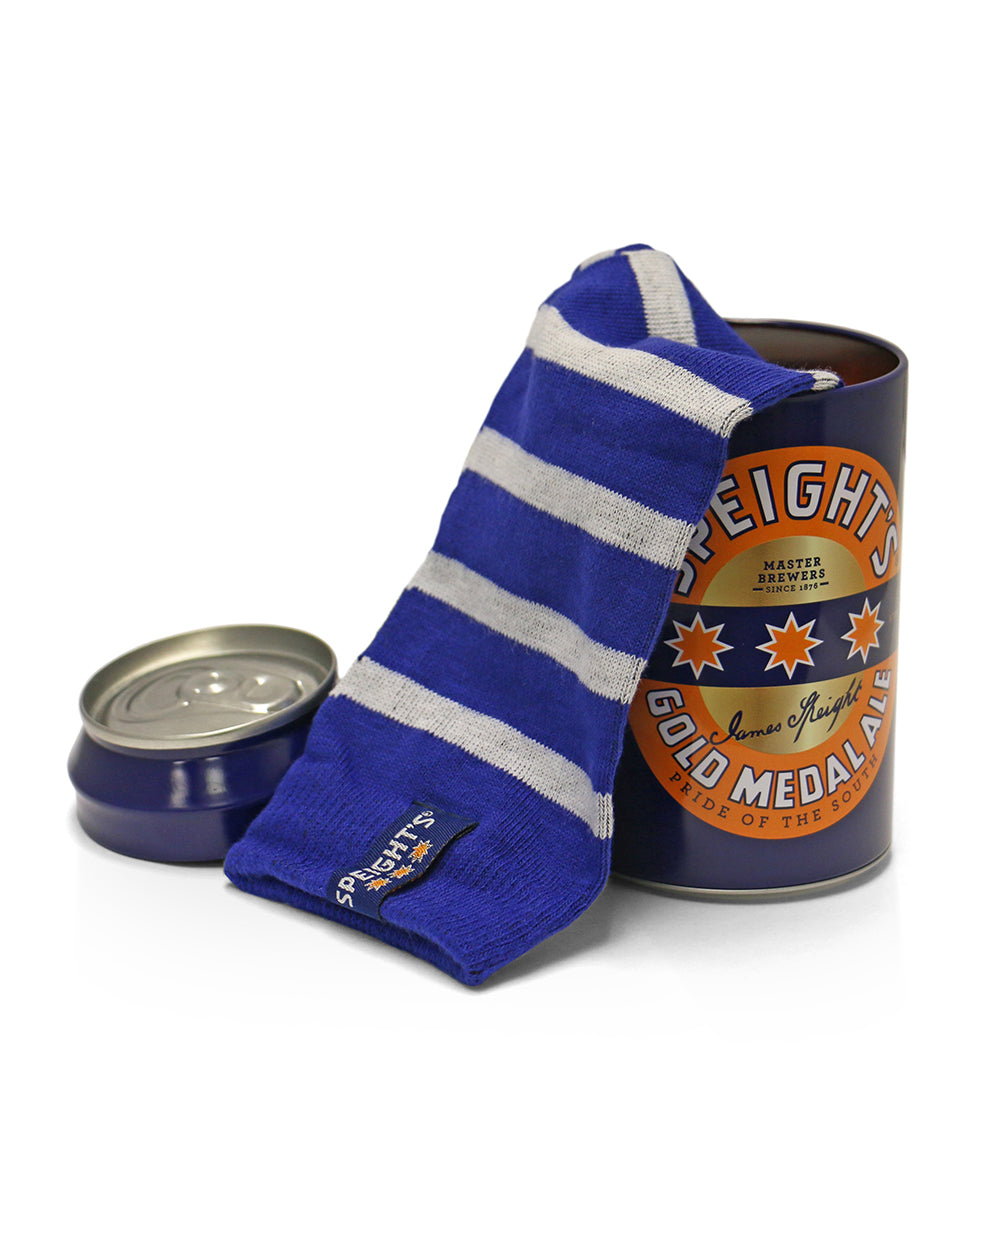 Speight's Socks In A Can -  Beer Gear Apparel & Merchandise - Speights - Lion Red - VB - Tokyo Dy merch